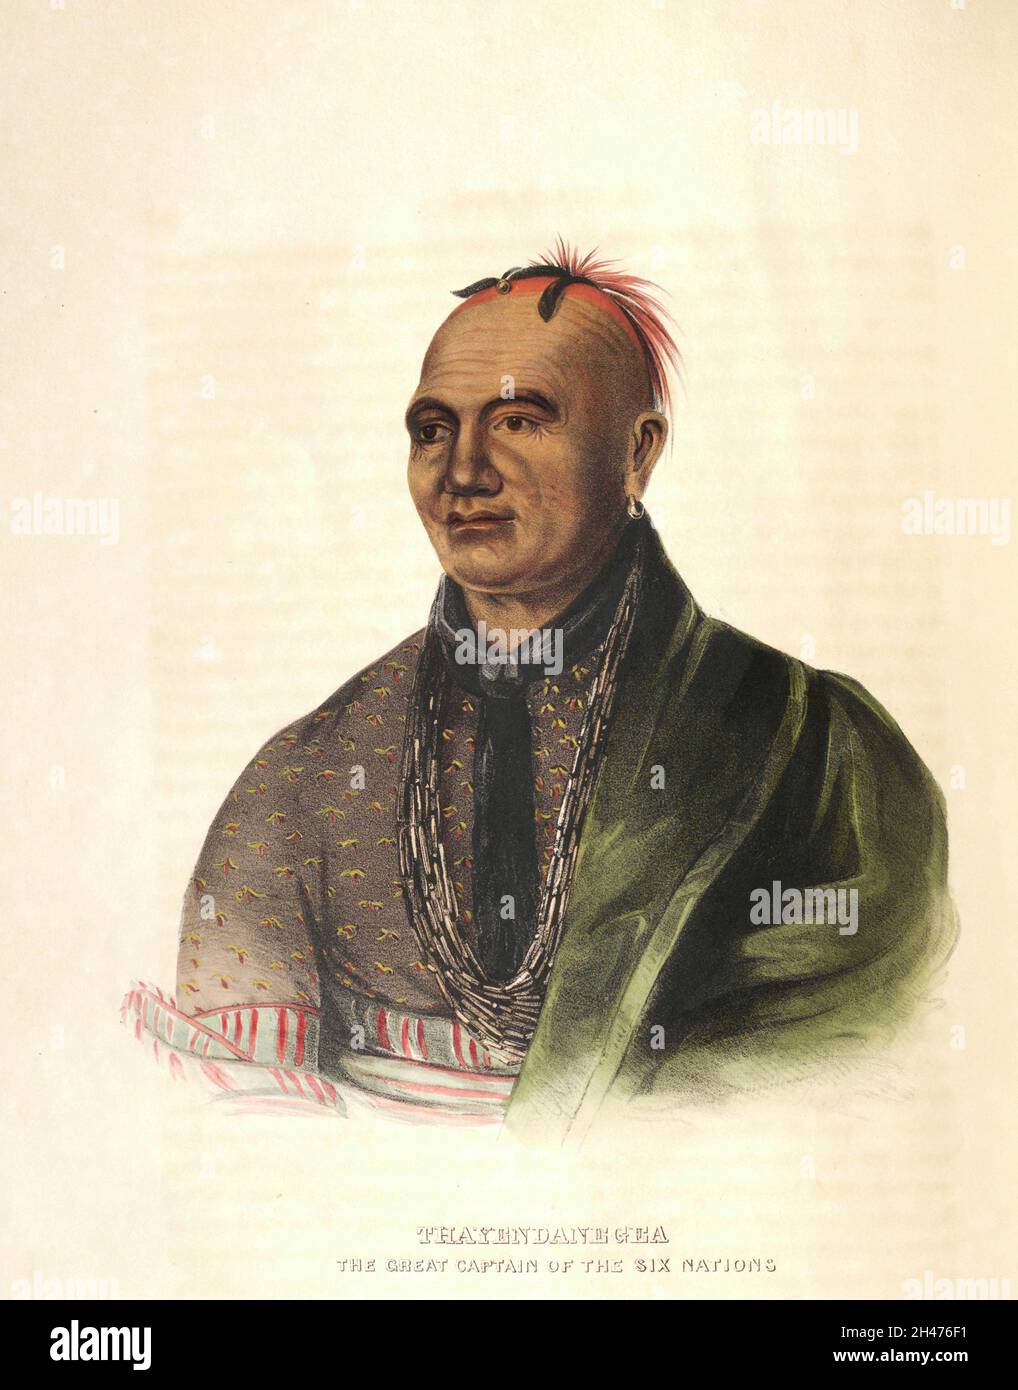 Thayendanegea or Joseph Brant (March 1743 – November 24, 1807) was a Mohawk military and political leader, based in present-day New York, who was closely associated with Great Britain during and after the American Revolution. Perhaps the Native American of his generation best known to the Americans and British, he met many of the most significant Anglo-American people of the age, including both George Washington and King George III. from the book ' History of the Indian Tribes of North America with biographical sketches and anecdotes of the principal chiefs. ' Volume 2 of 3 by Thomas Loraine, Stock Photo